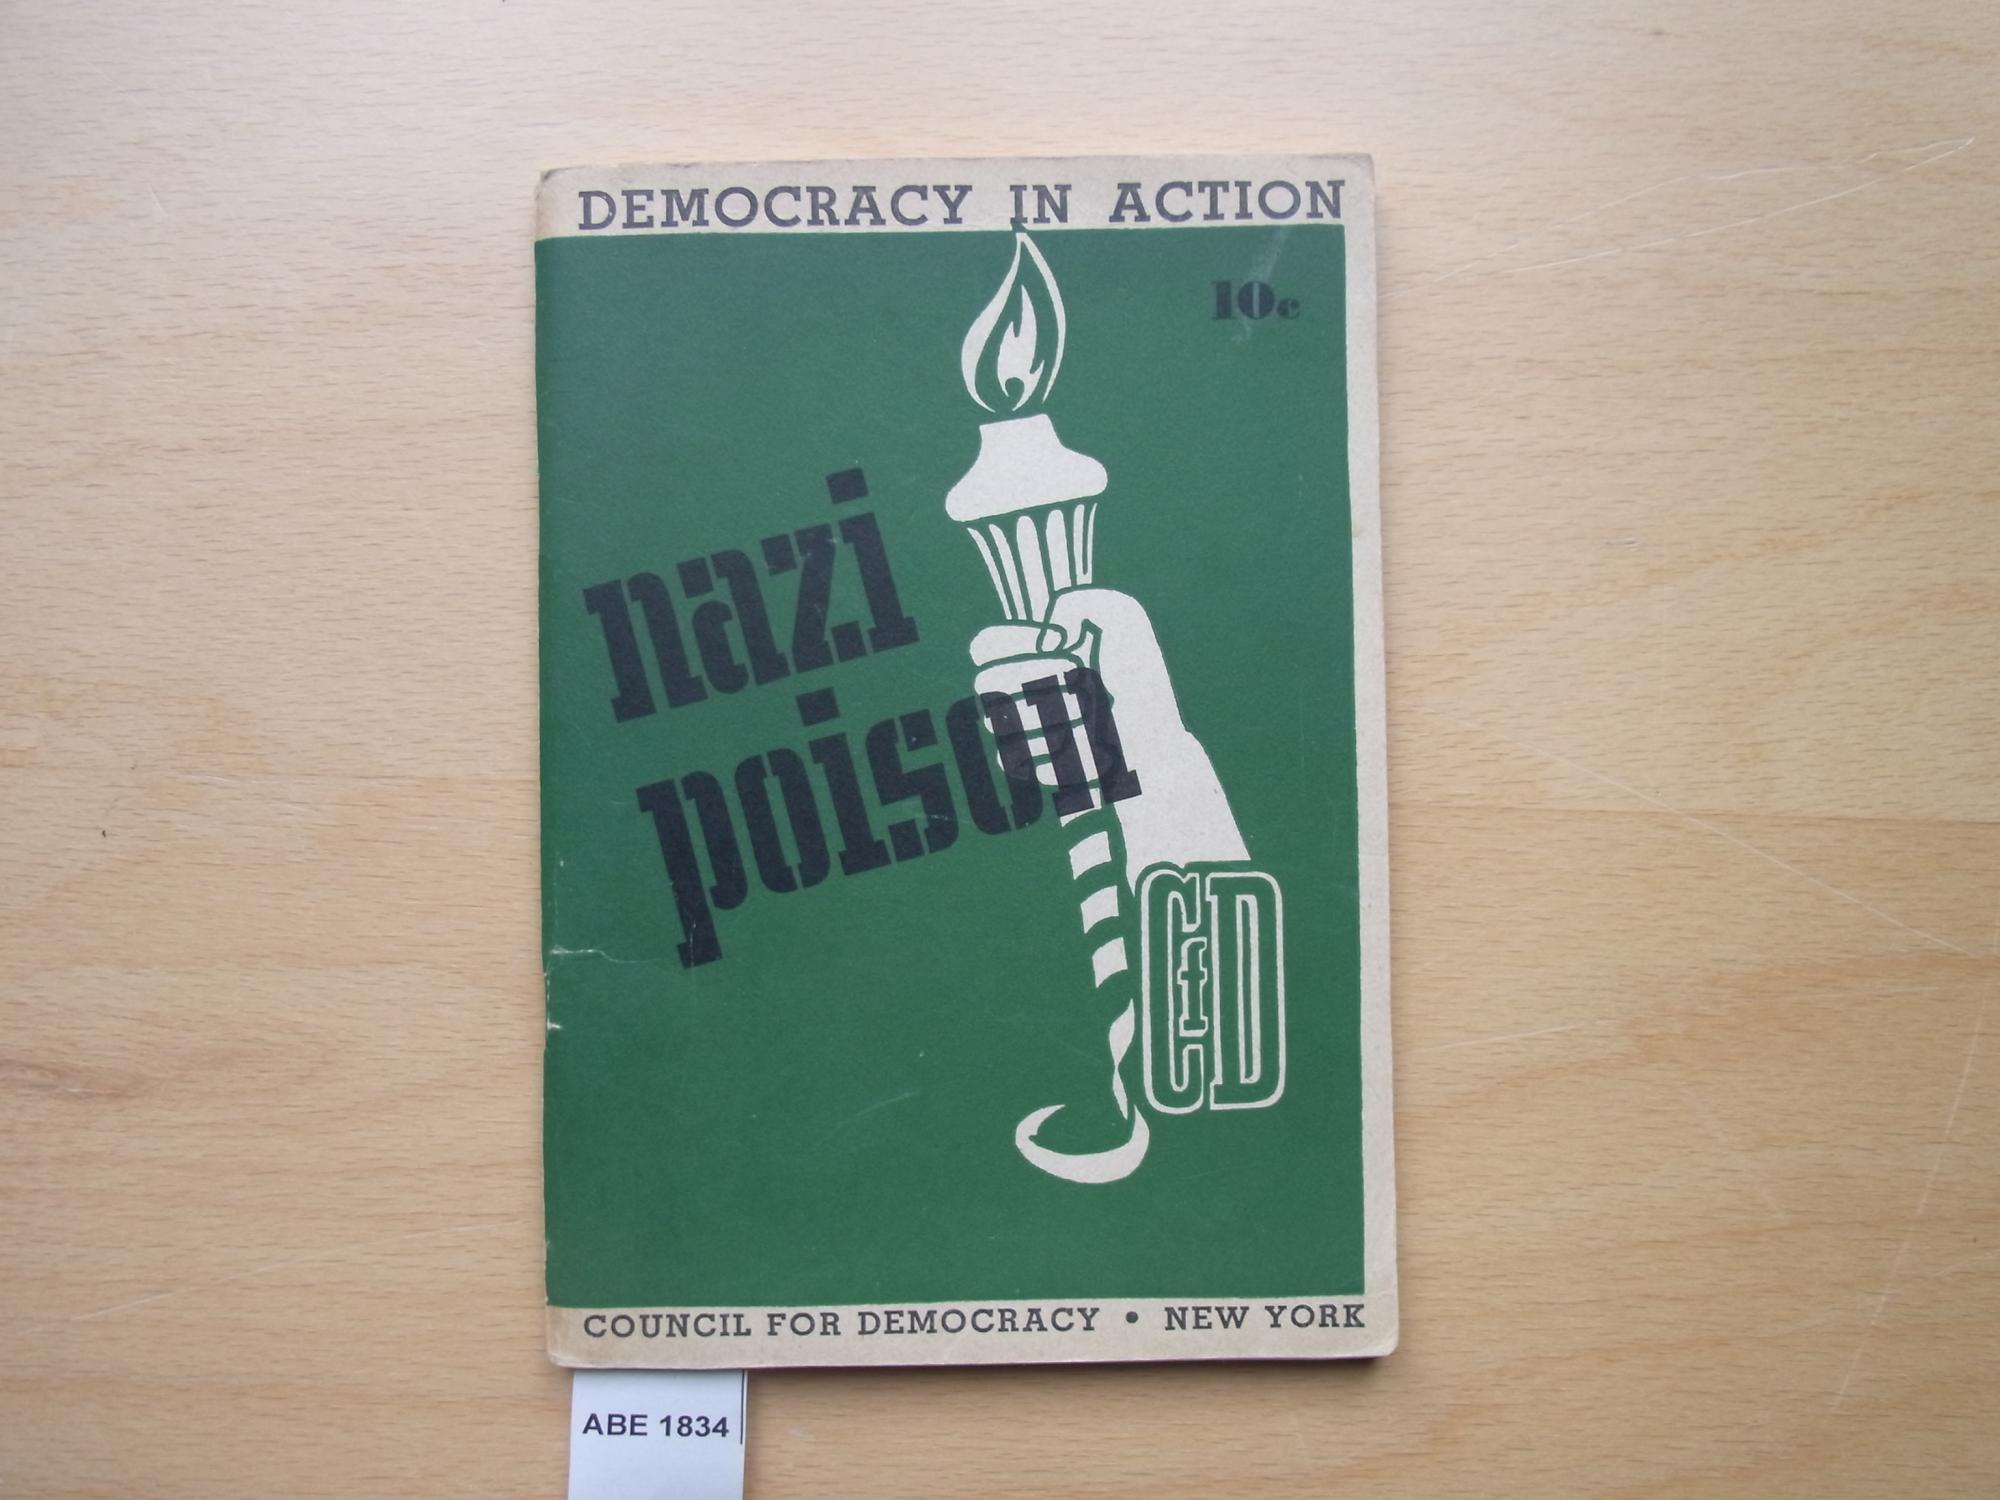 Nazi Poison. How we can destroy Hitler`s Propaganda against the Jews. - Council For Democracy